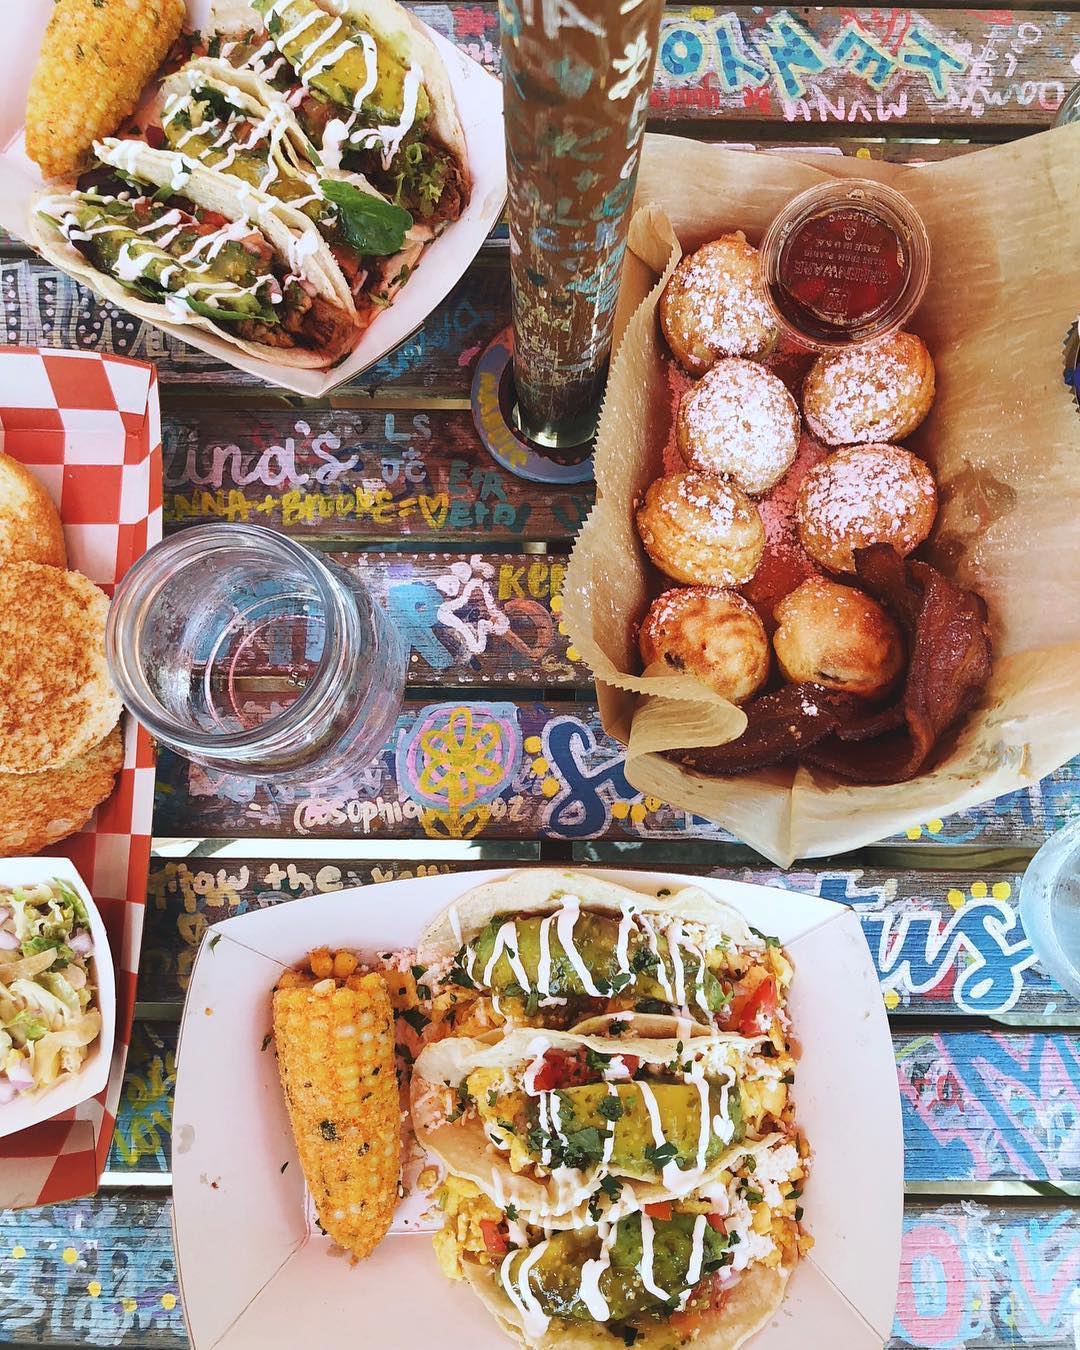 Overhead view of tacos, corn, and more on a table. Photo by Instagram user @katalinascafe